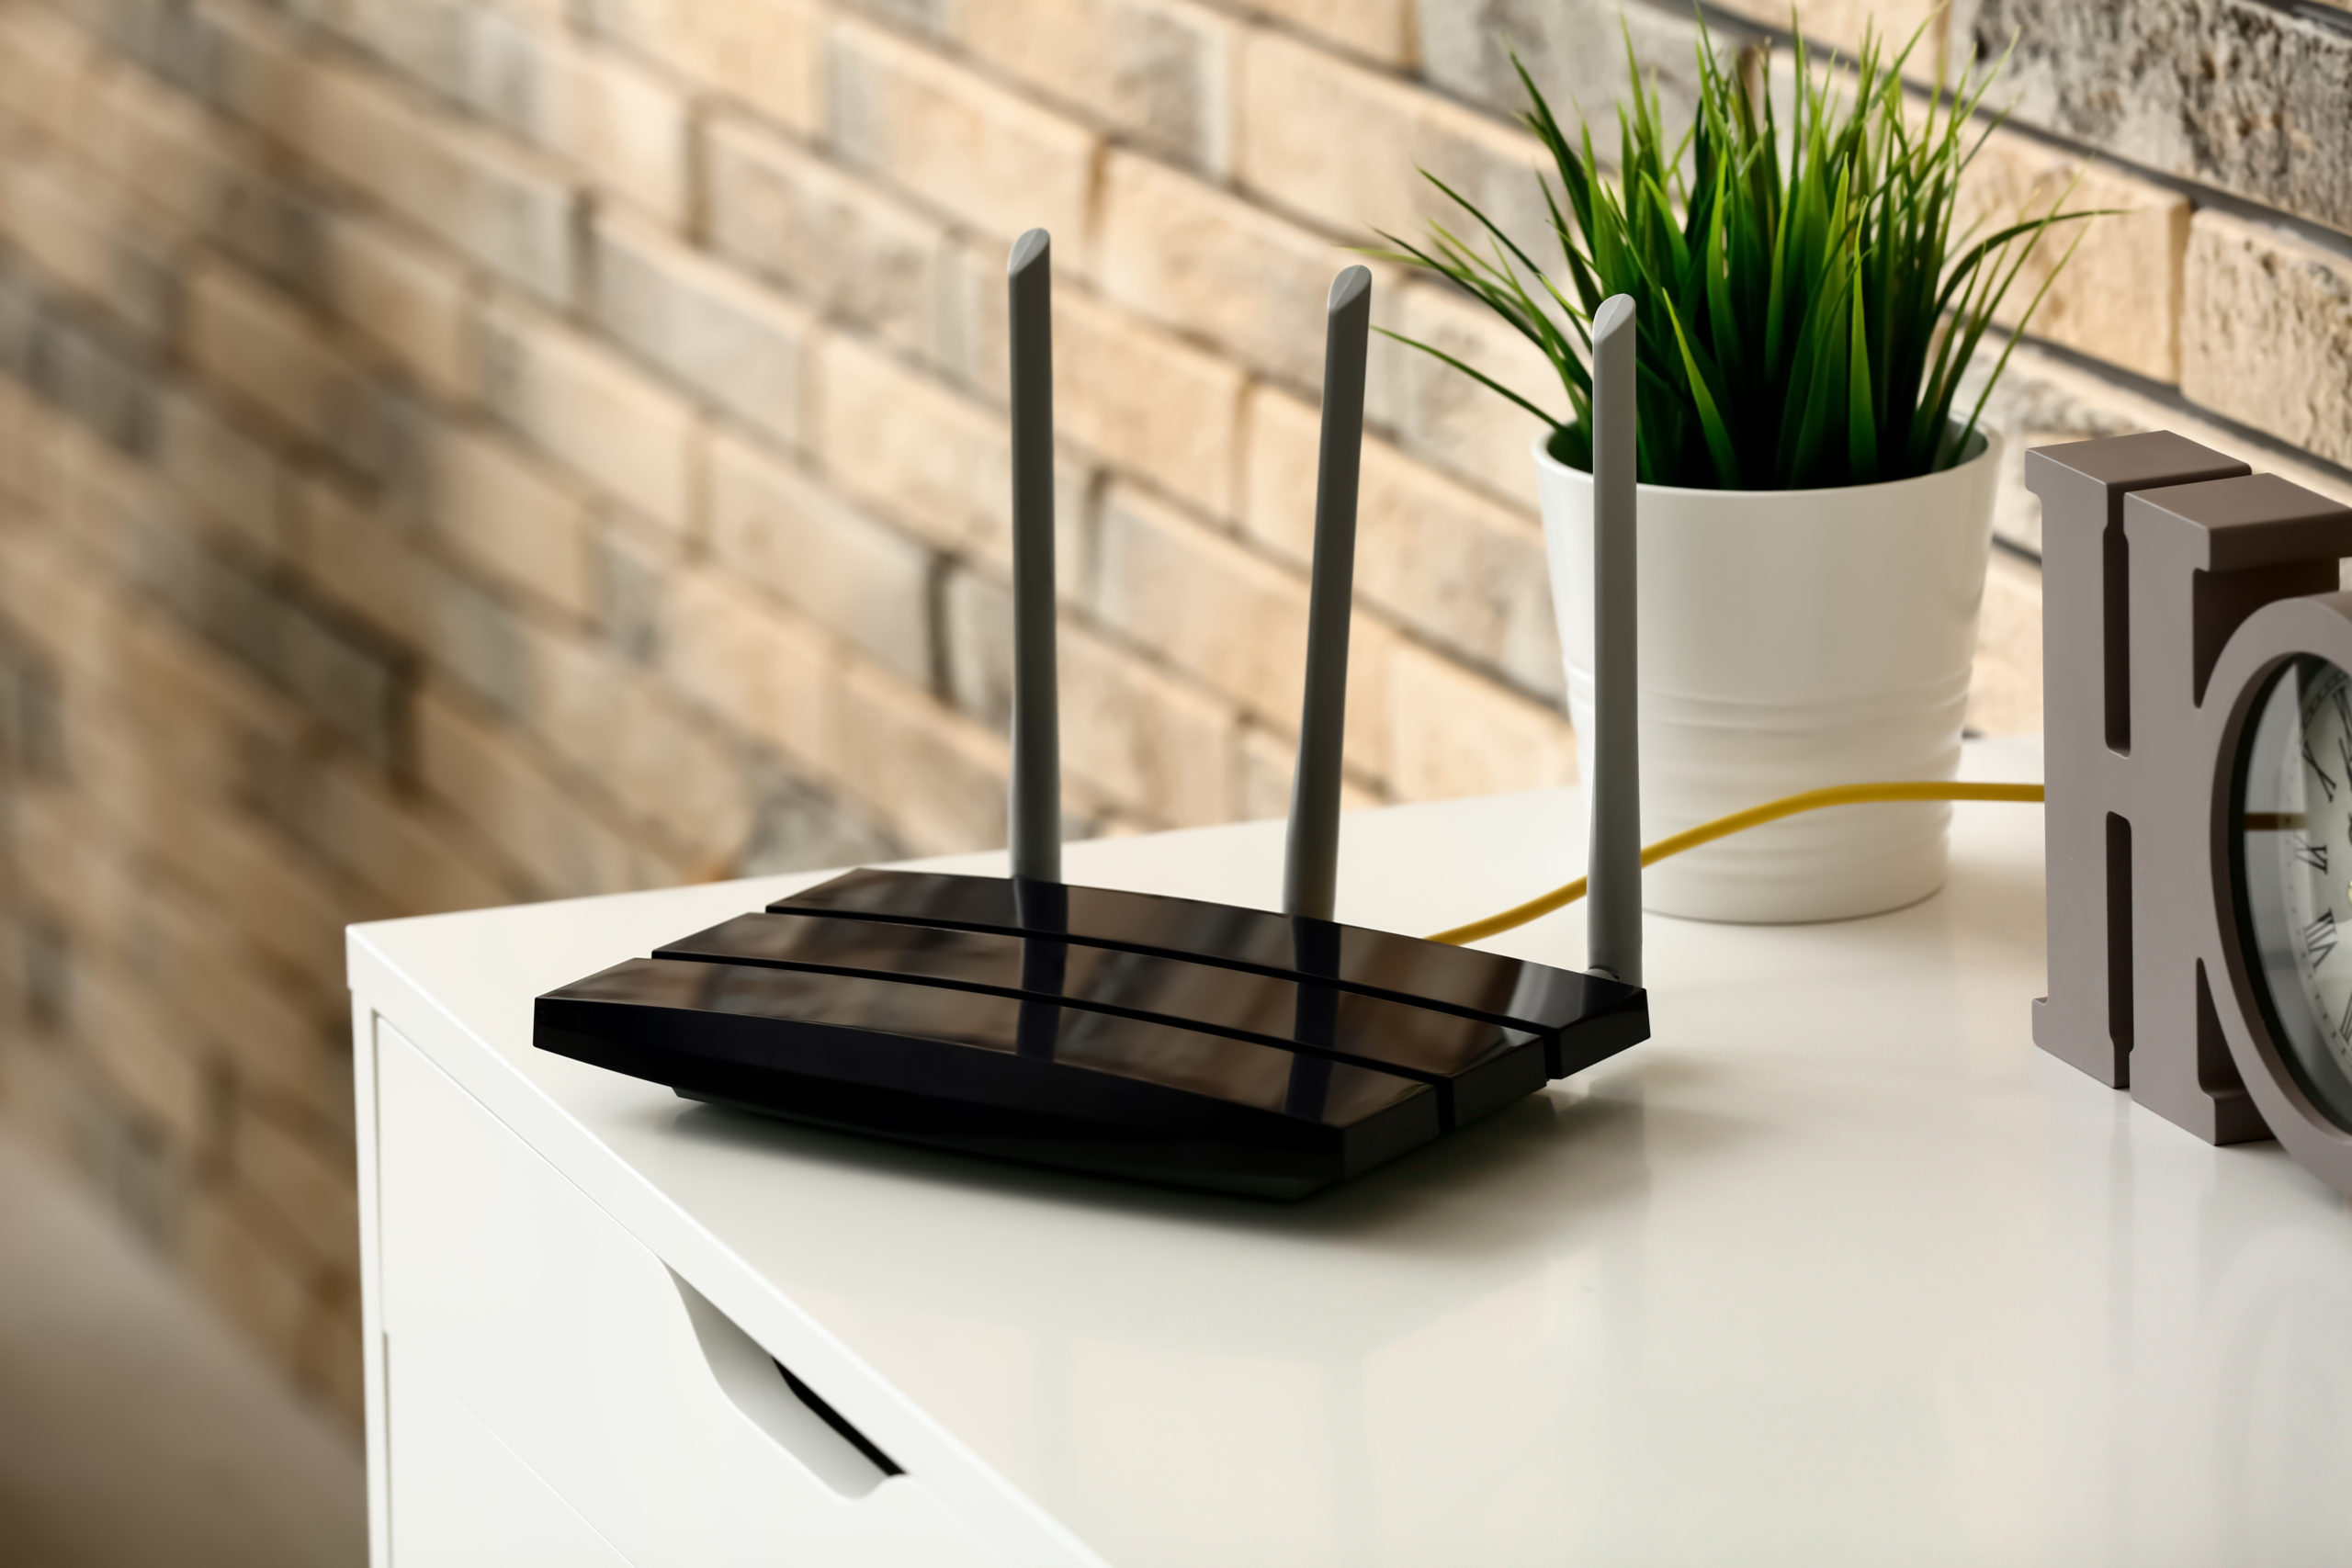 Wi-Fi enemy No. 1 in your home;  Learn how to defeat him